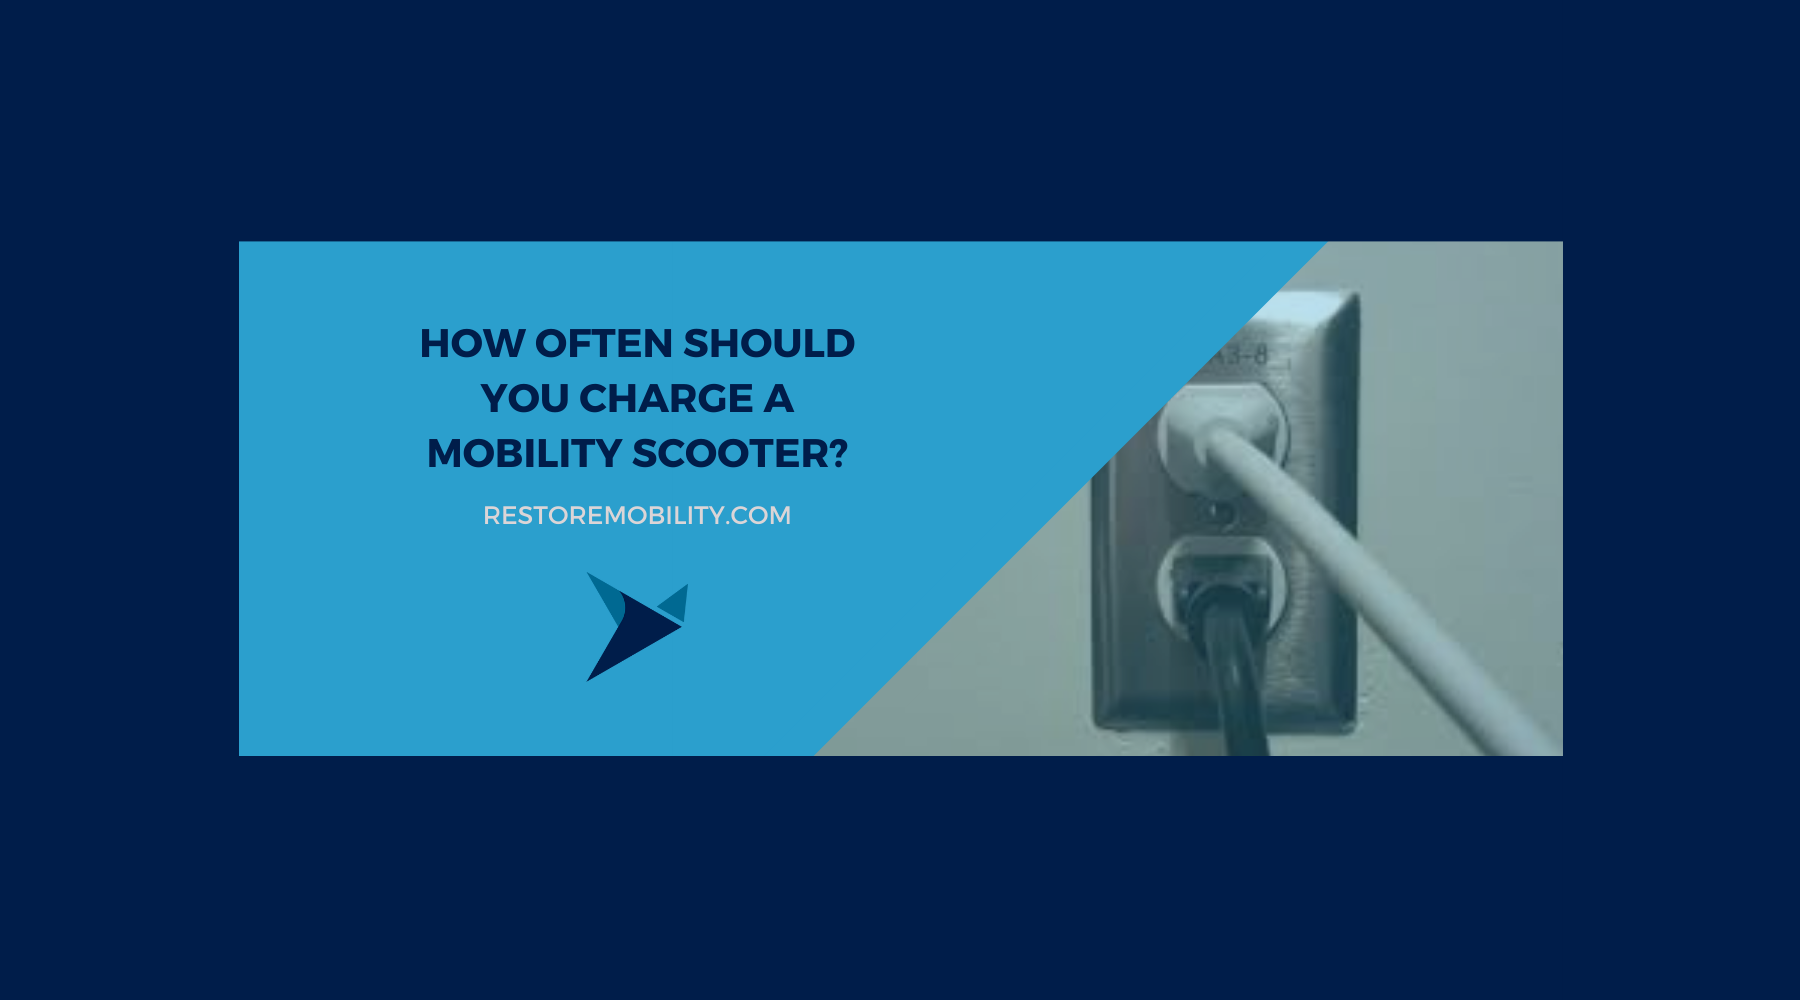 How Often Should You Charge a Mobility Scooter?